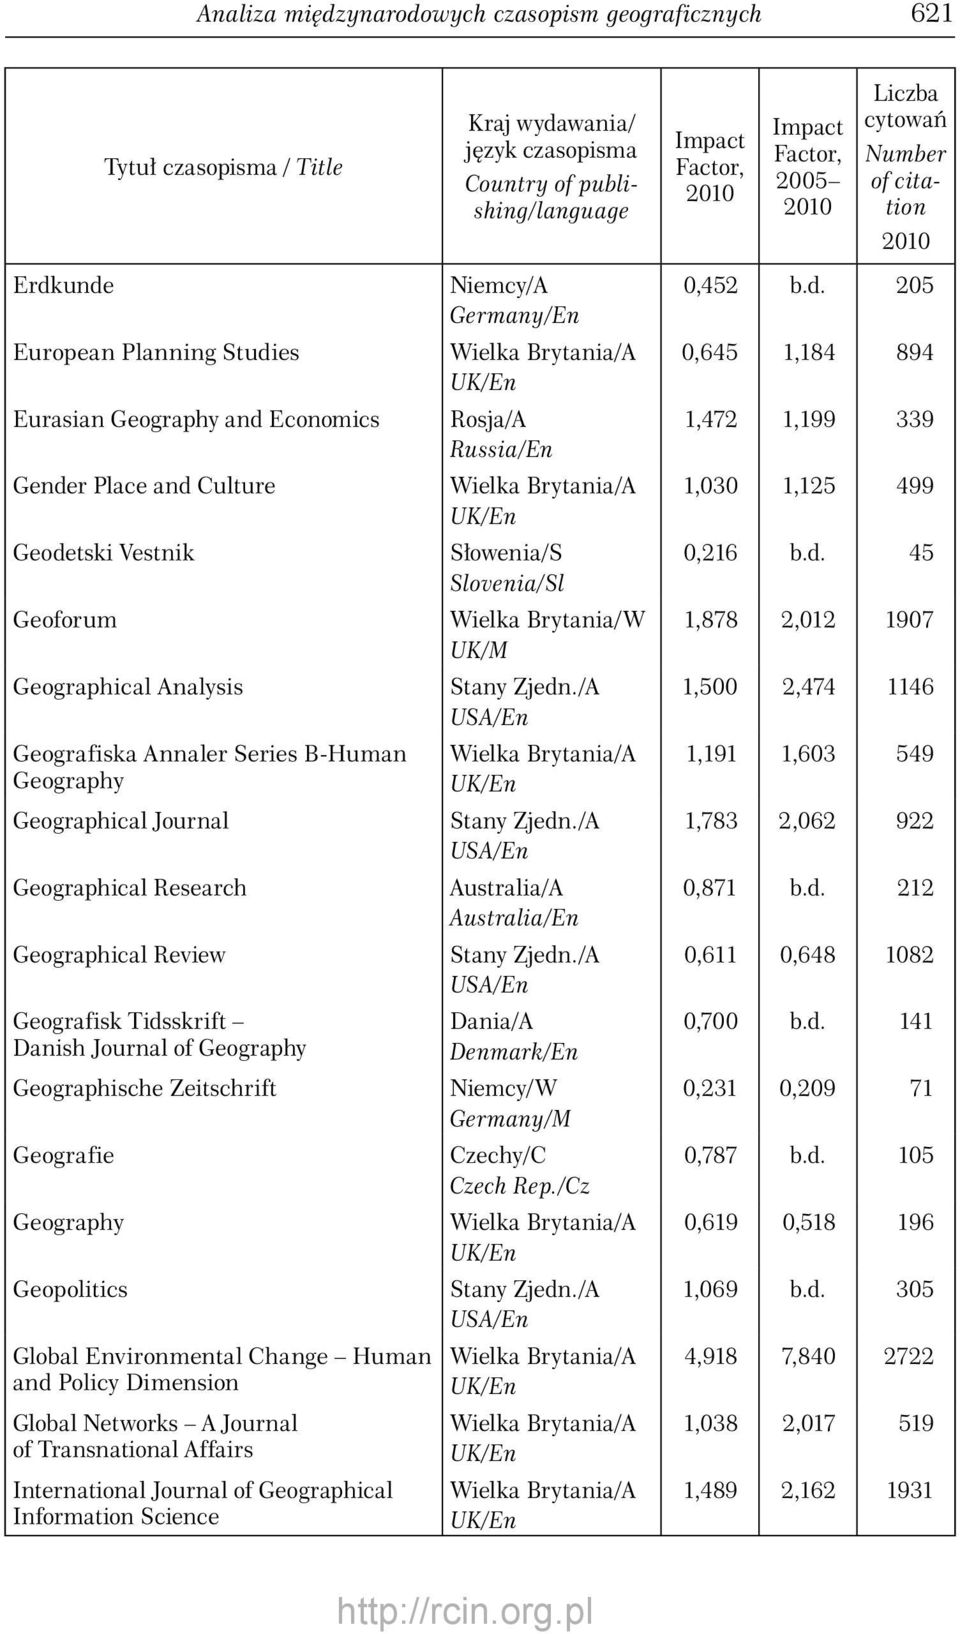 Geographical Journal Geographical Research Geographical Review Geografisk Tidsskrift Danish Journal of Geography Geographische Zeitschrift Geografie Geography Geopolitics Global Environmental Change